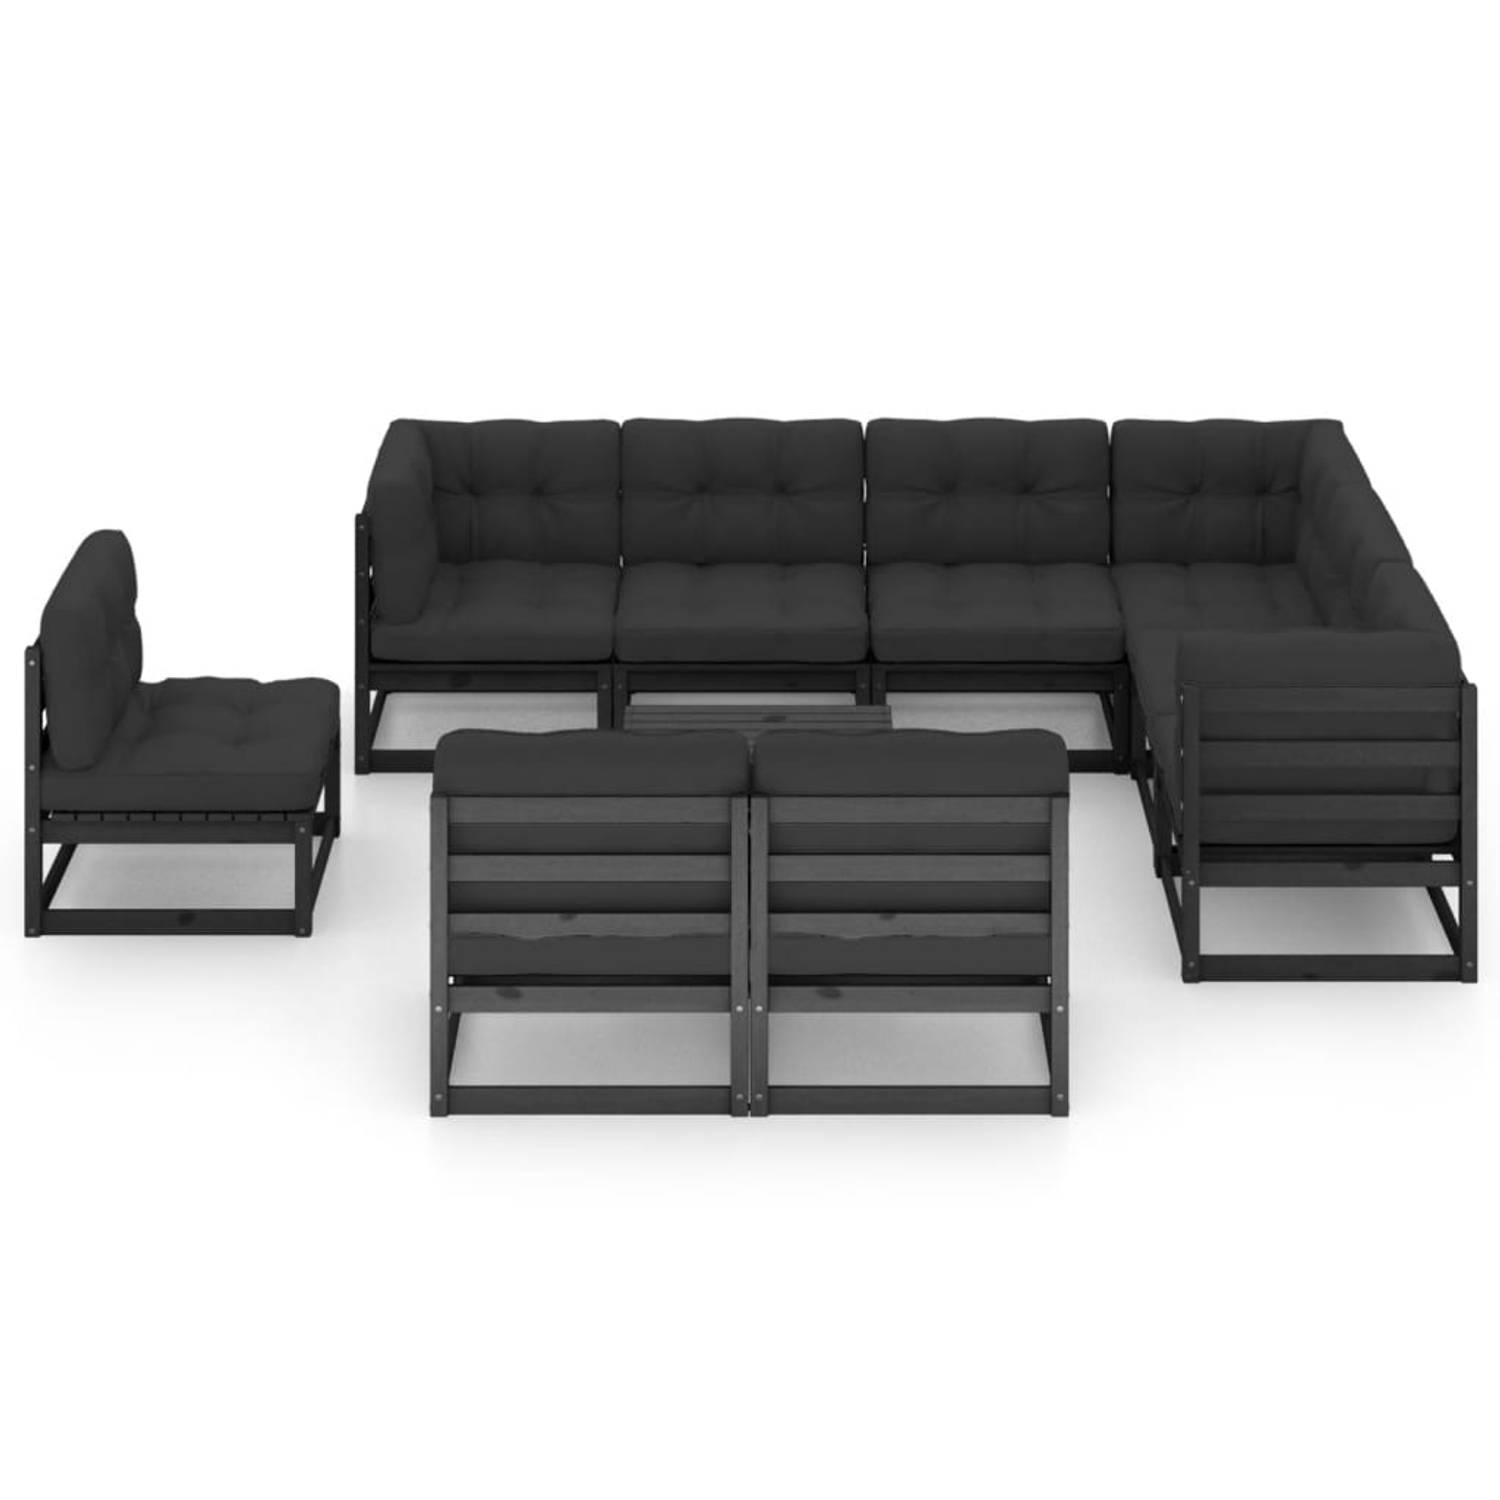 The Living Store Tuinset Grenenhout - Lounge - 70 x 70 x 67 cm - Zwart - Antraciet